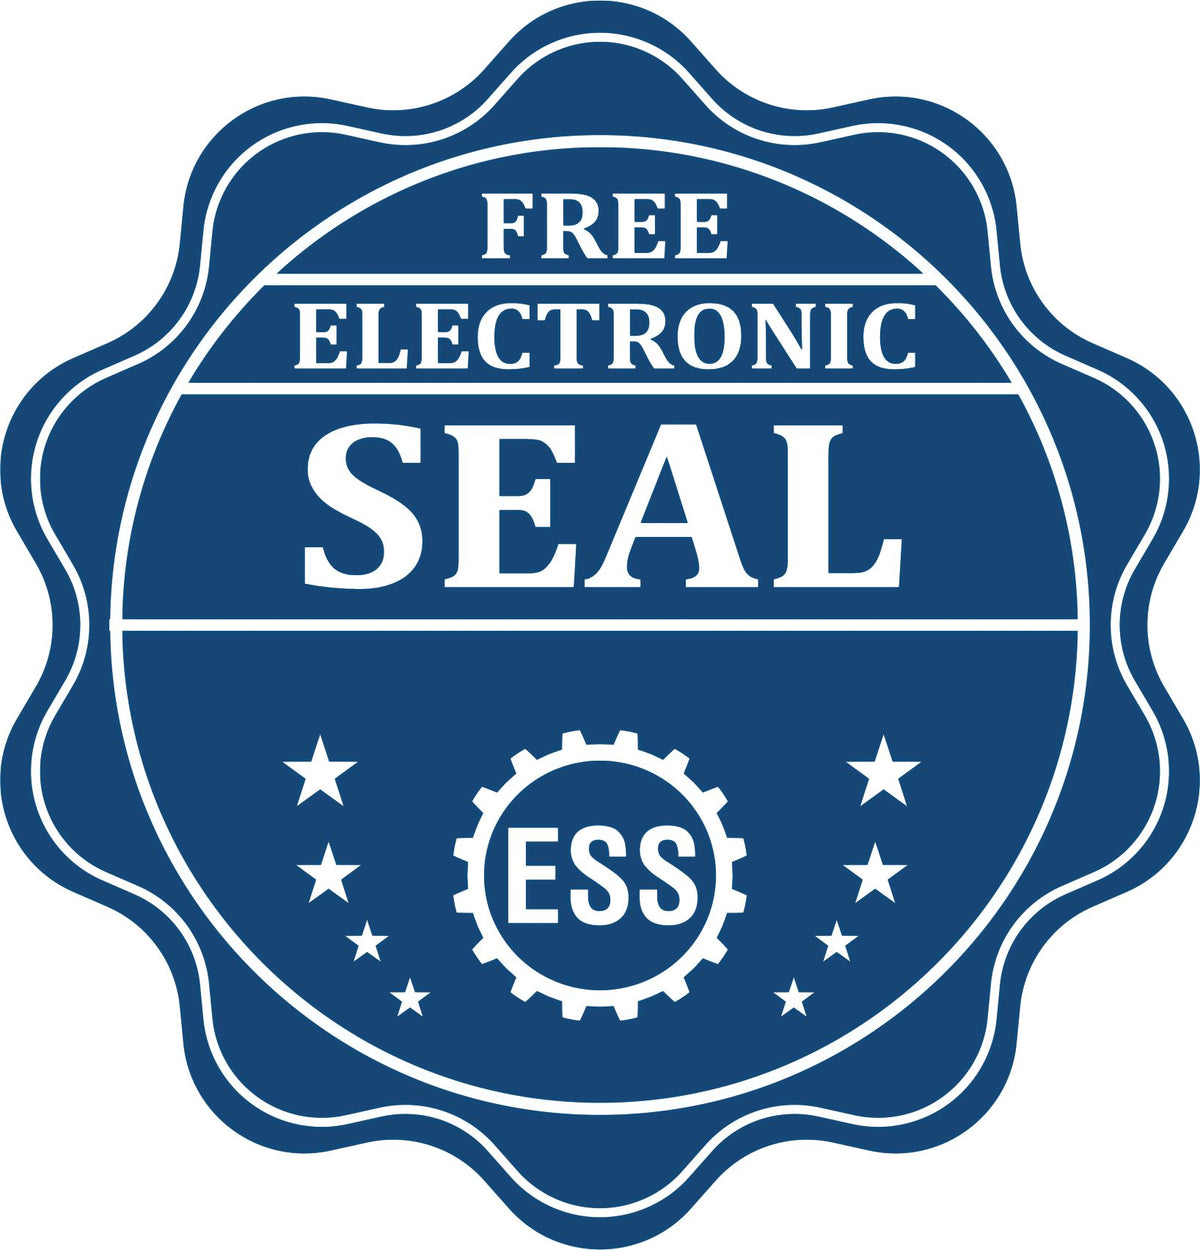 A badge showing a free electronic seal for the Super Slim Texas Notary Public Stamp with stars and the ESS gear on the emblem.